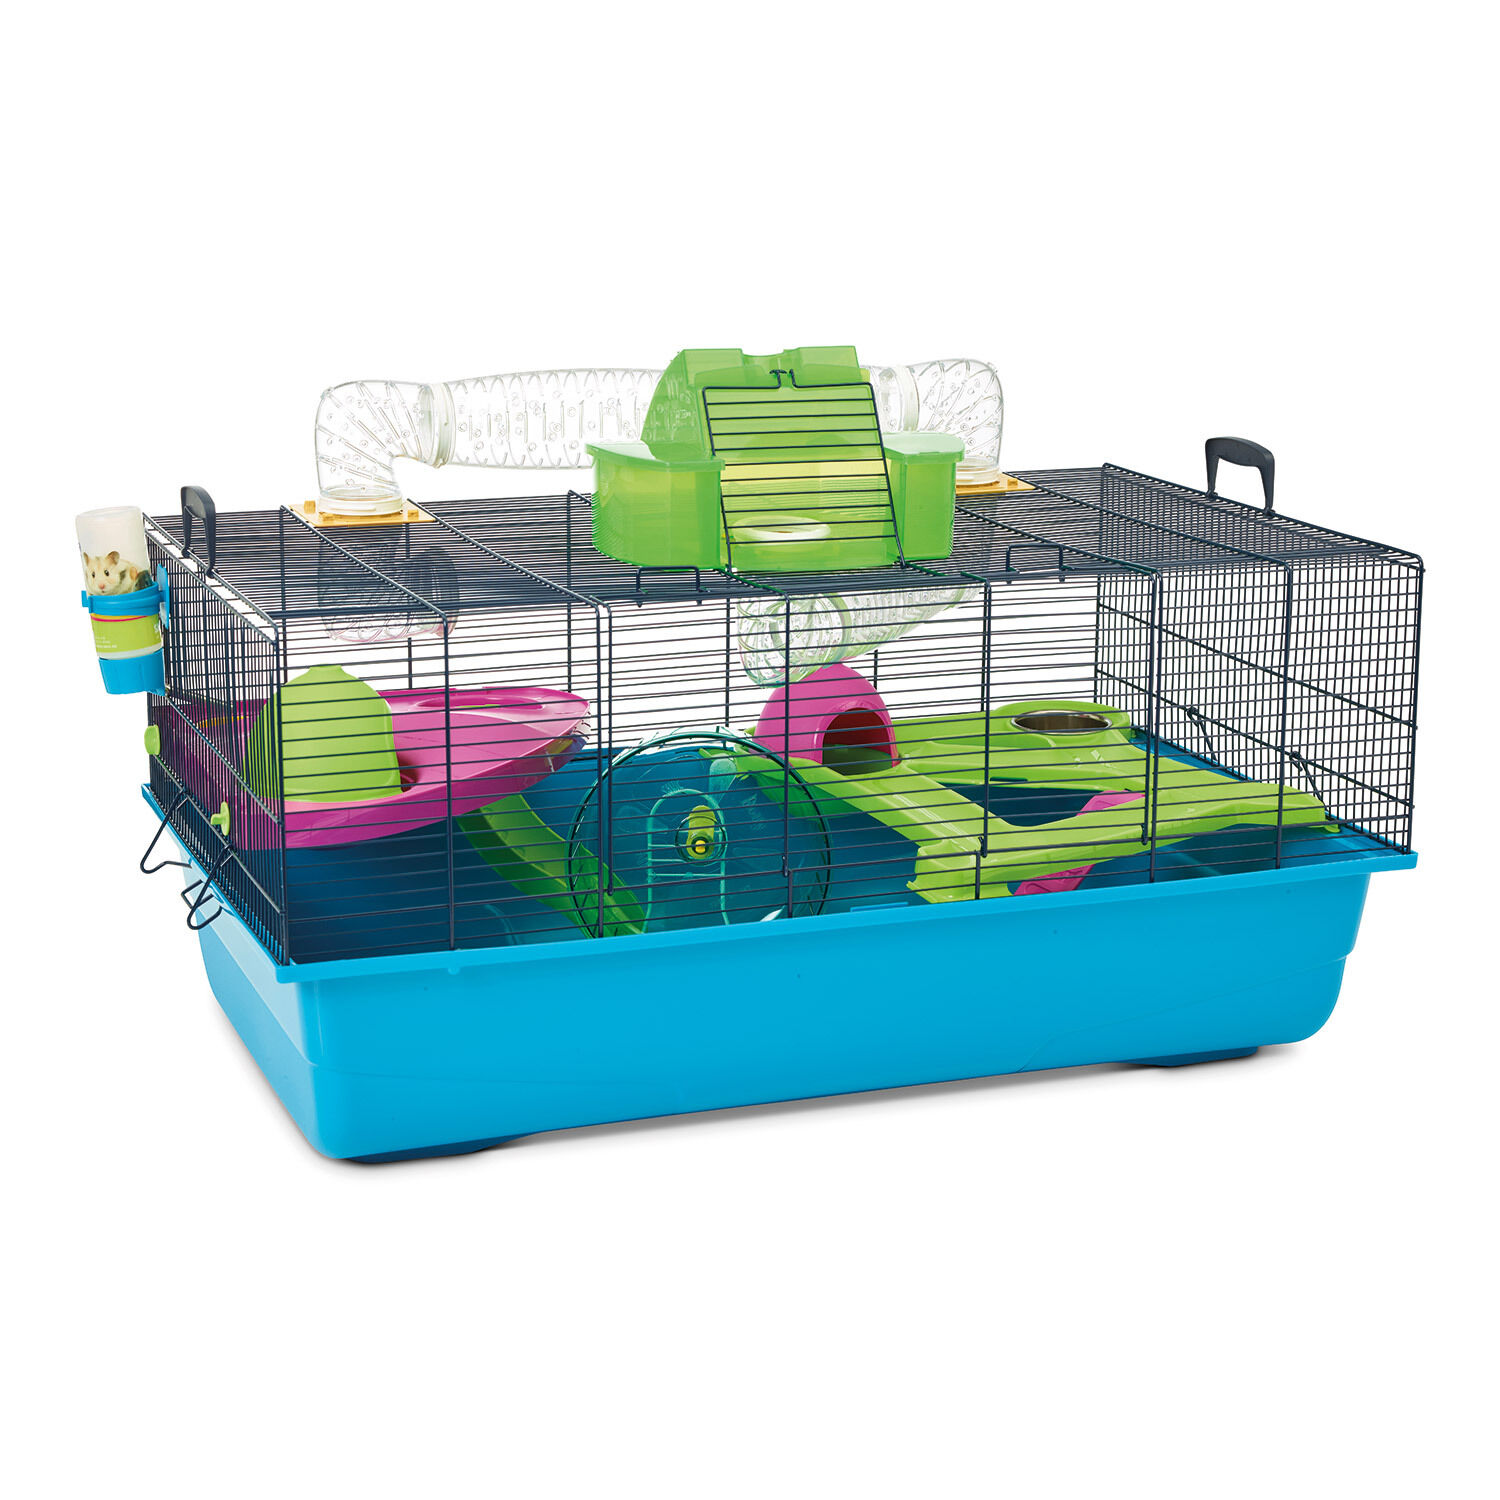 25% Off Savic Hamster Heaven Cage 31 in.